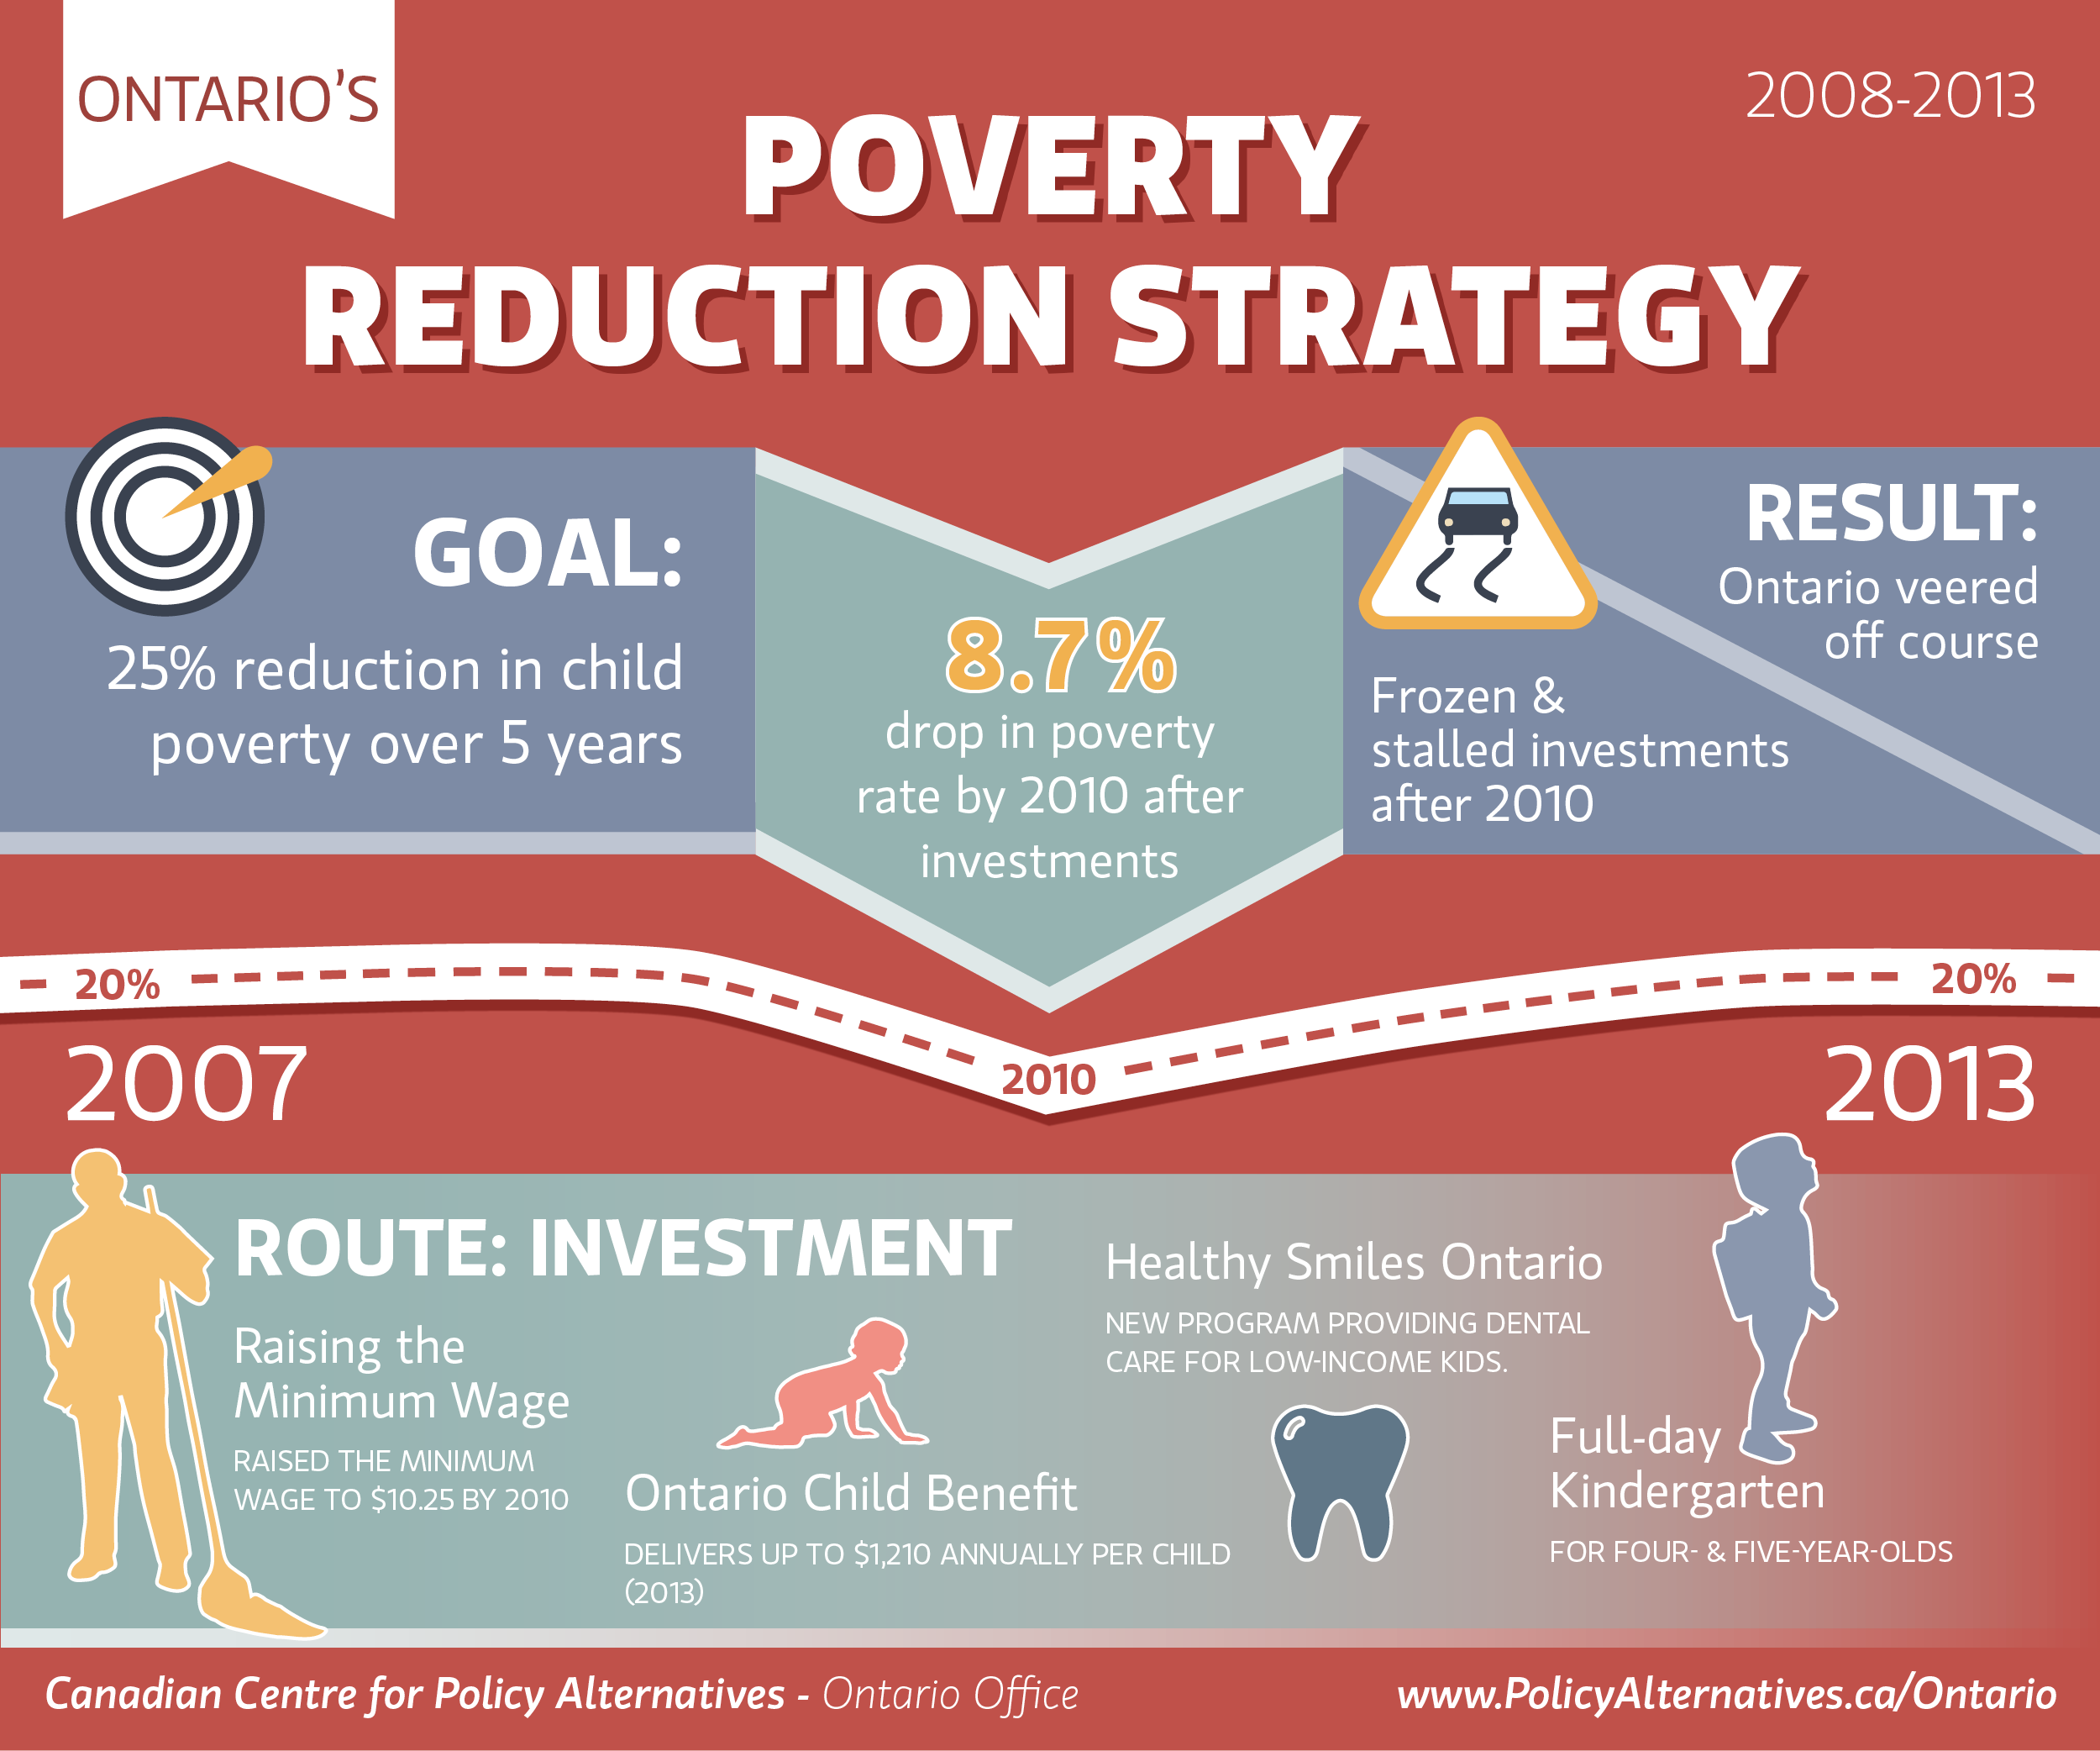 Renewing the poverty reduction strategy